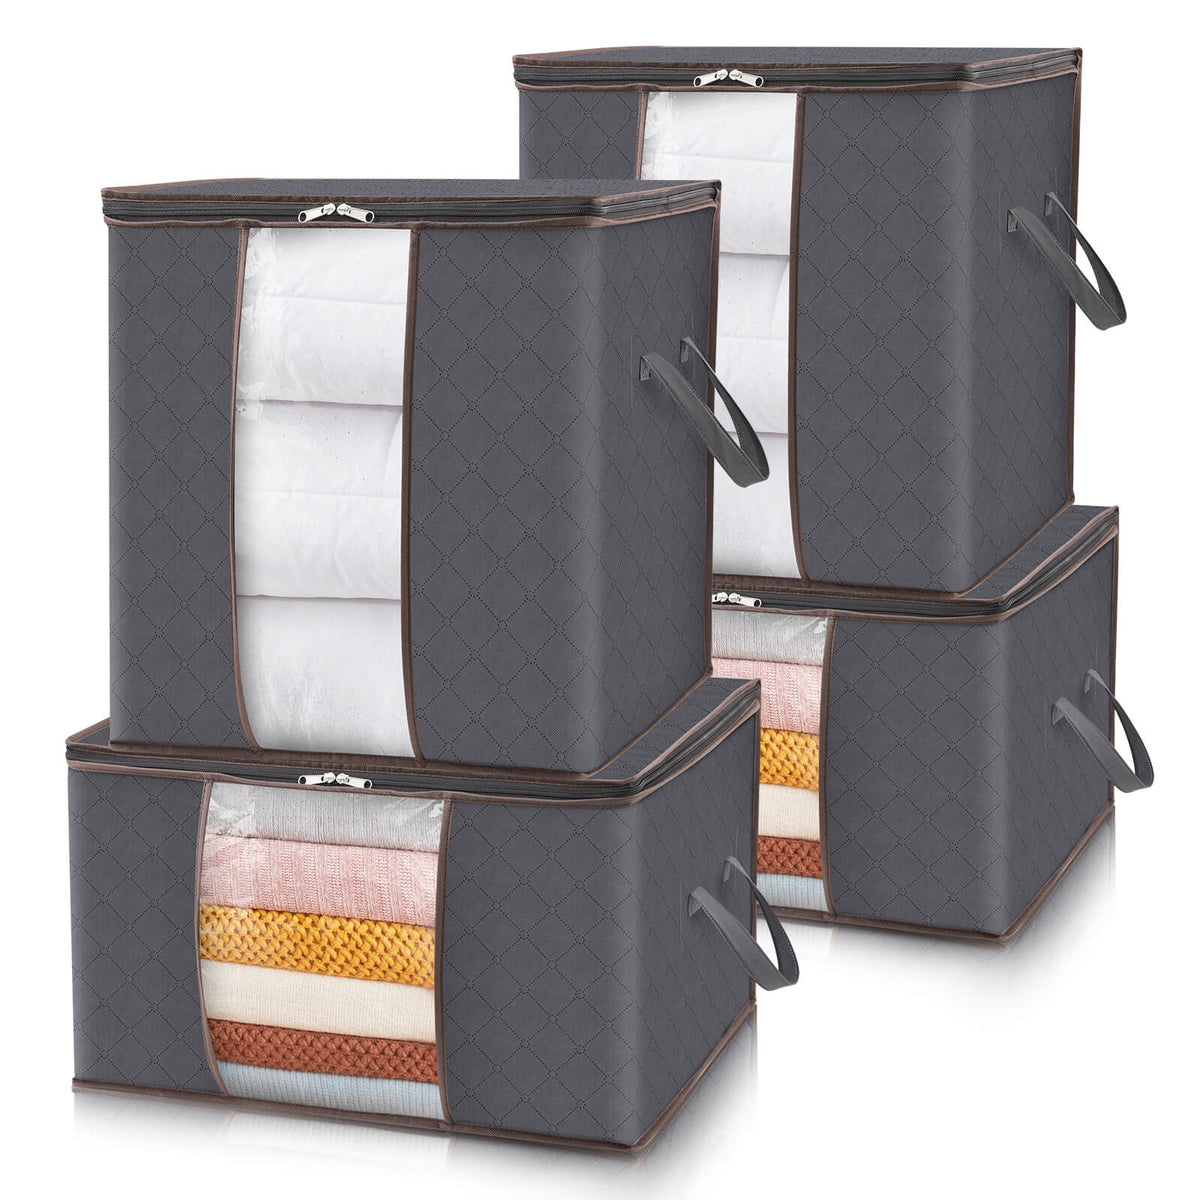 Large Capacity Clothes Storage Bags, Storage Organizers with